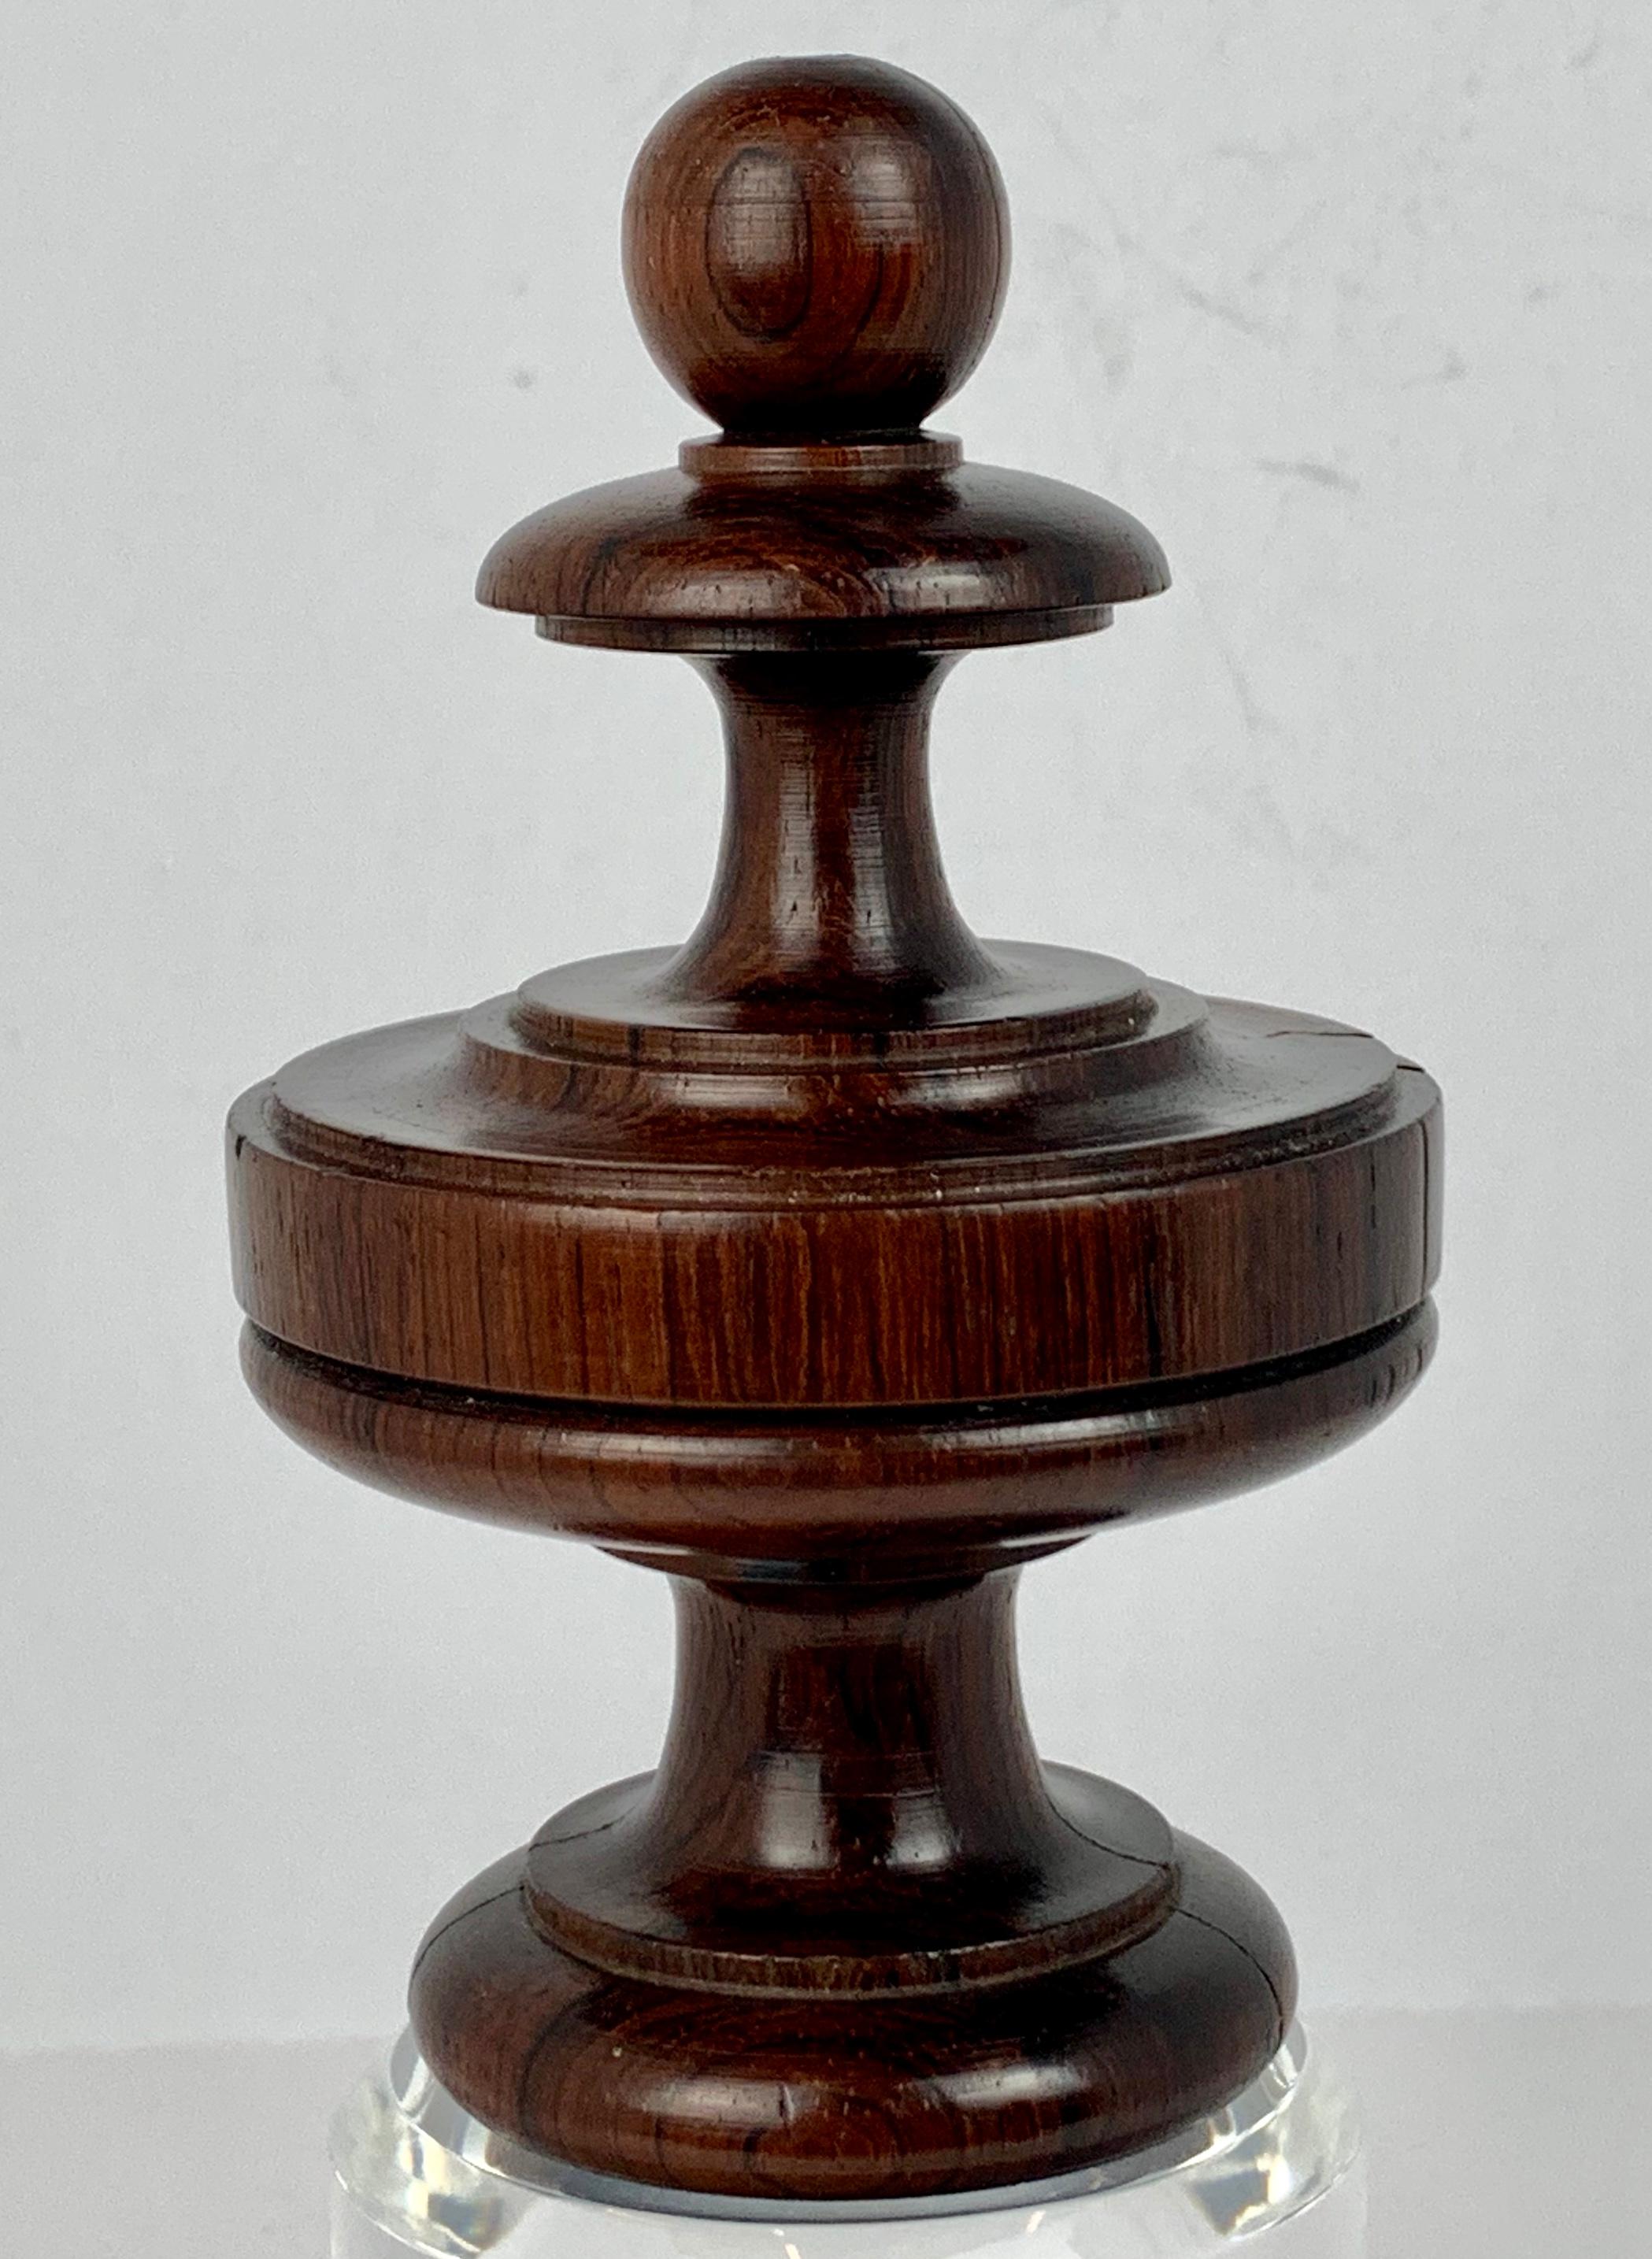 Rosewood turned finial originally crafted for a fine piece of 19th century furniture. We have had it hand polished and placed on a custom beveled Lucite pedestal. 
Polished by hand in our workshop.
The overall height is 8.25